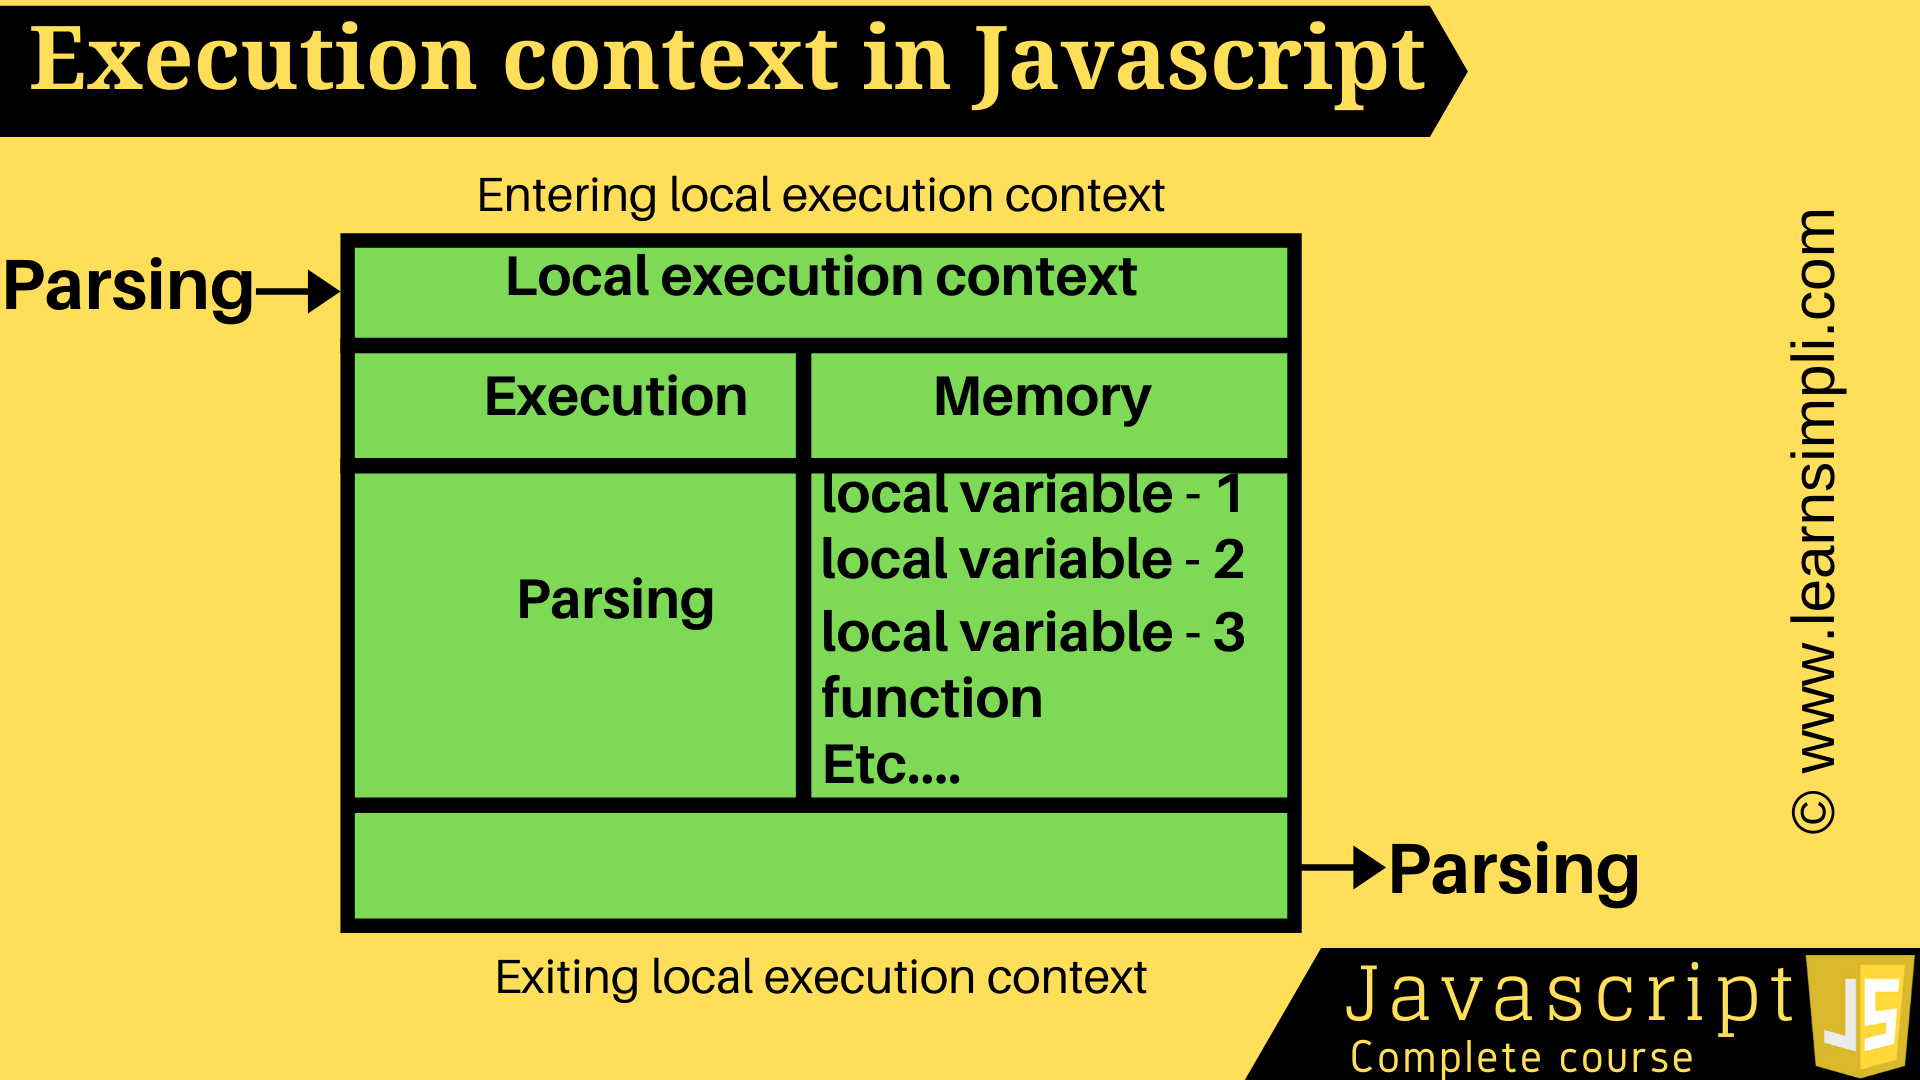 What is the execution context in Javascript